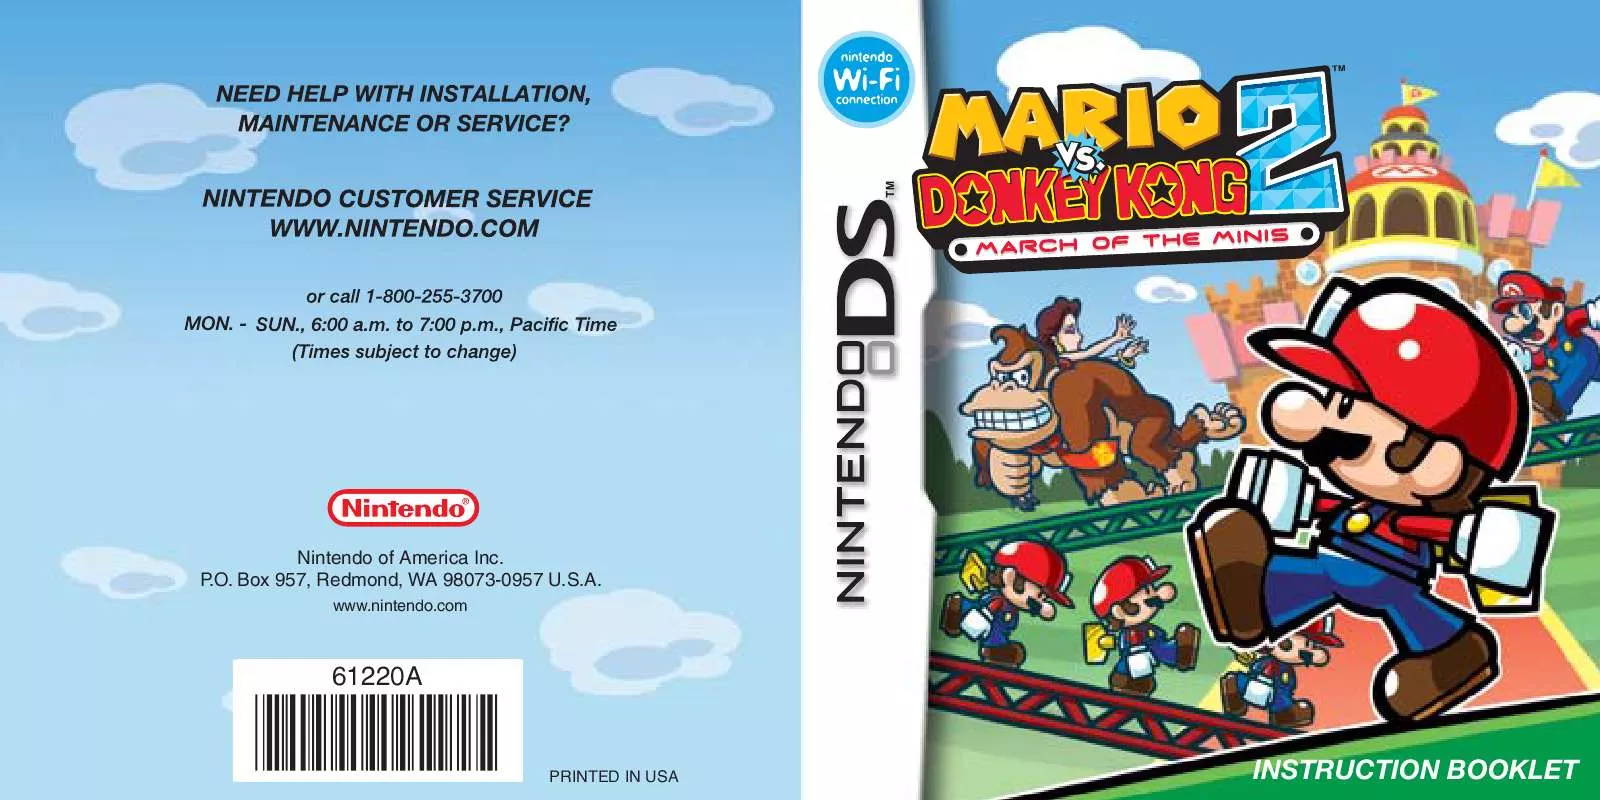 Mode d'emploi NINTENDO DS MARIO VS DONKEY KONG 2 MARCH OF THE MINIS